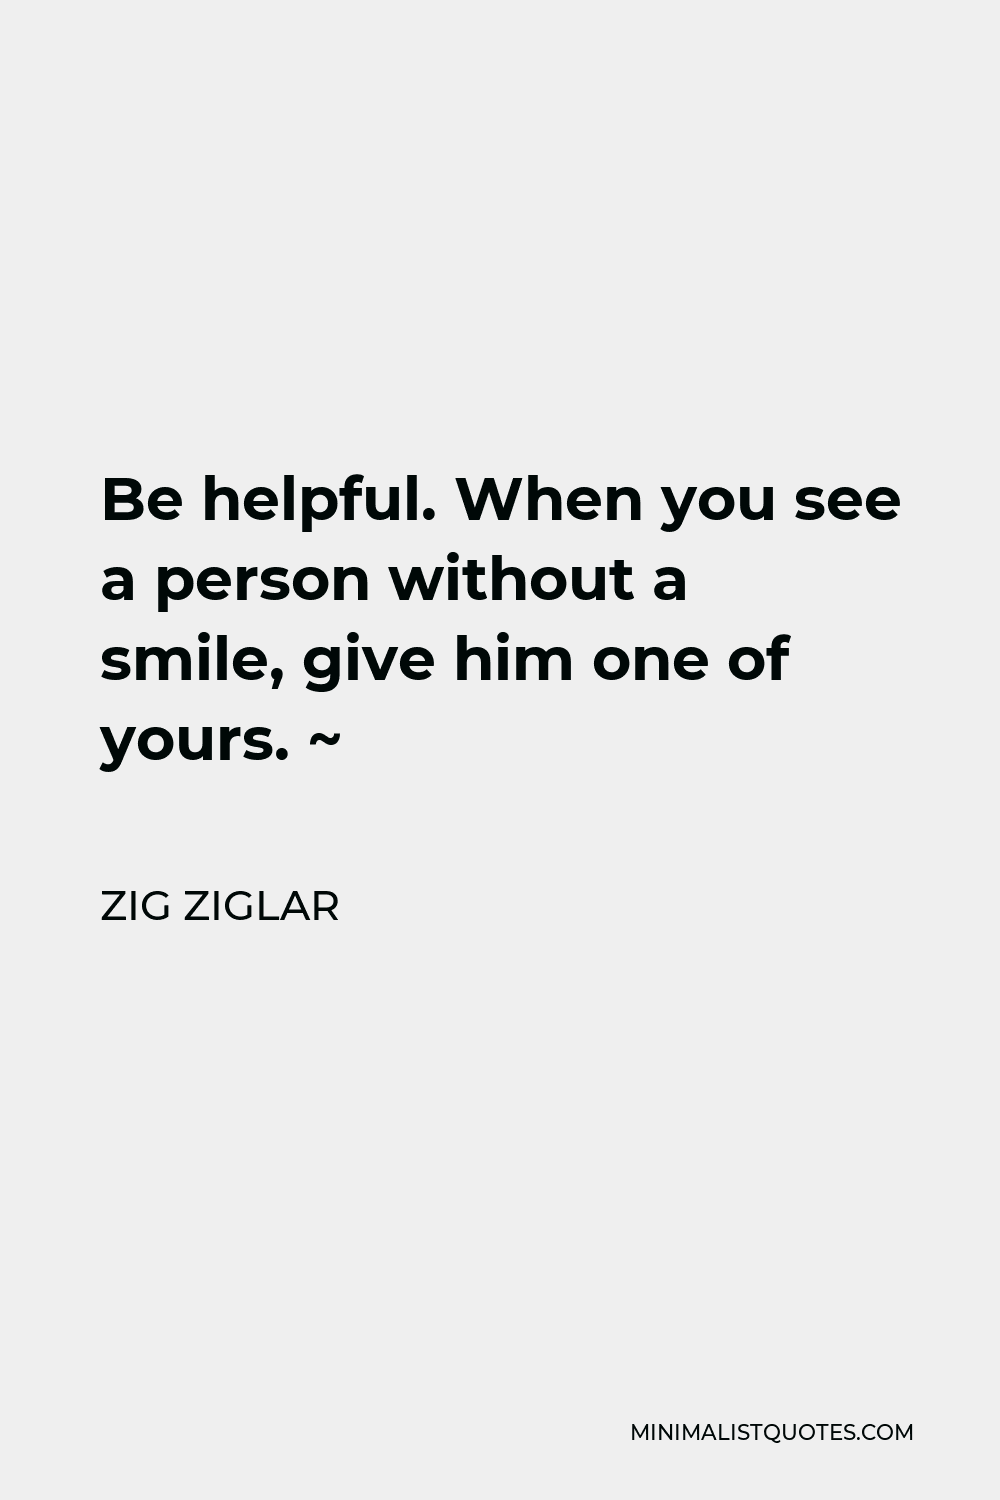 Zig Ziglar Quote - Be helpful. When you see a person without a smile, give him one of yours. ~